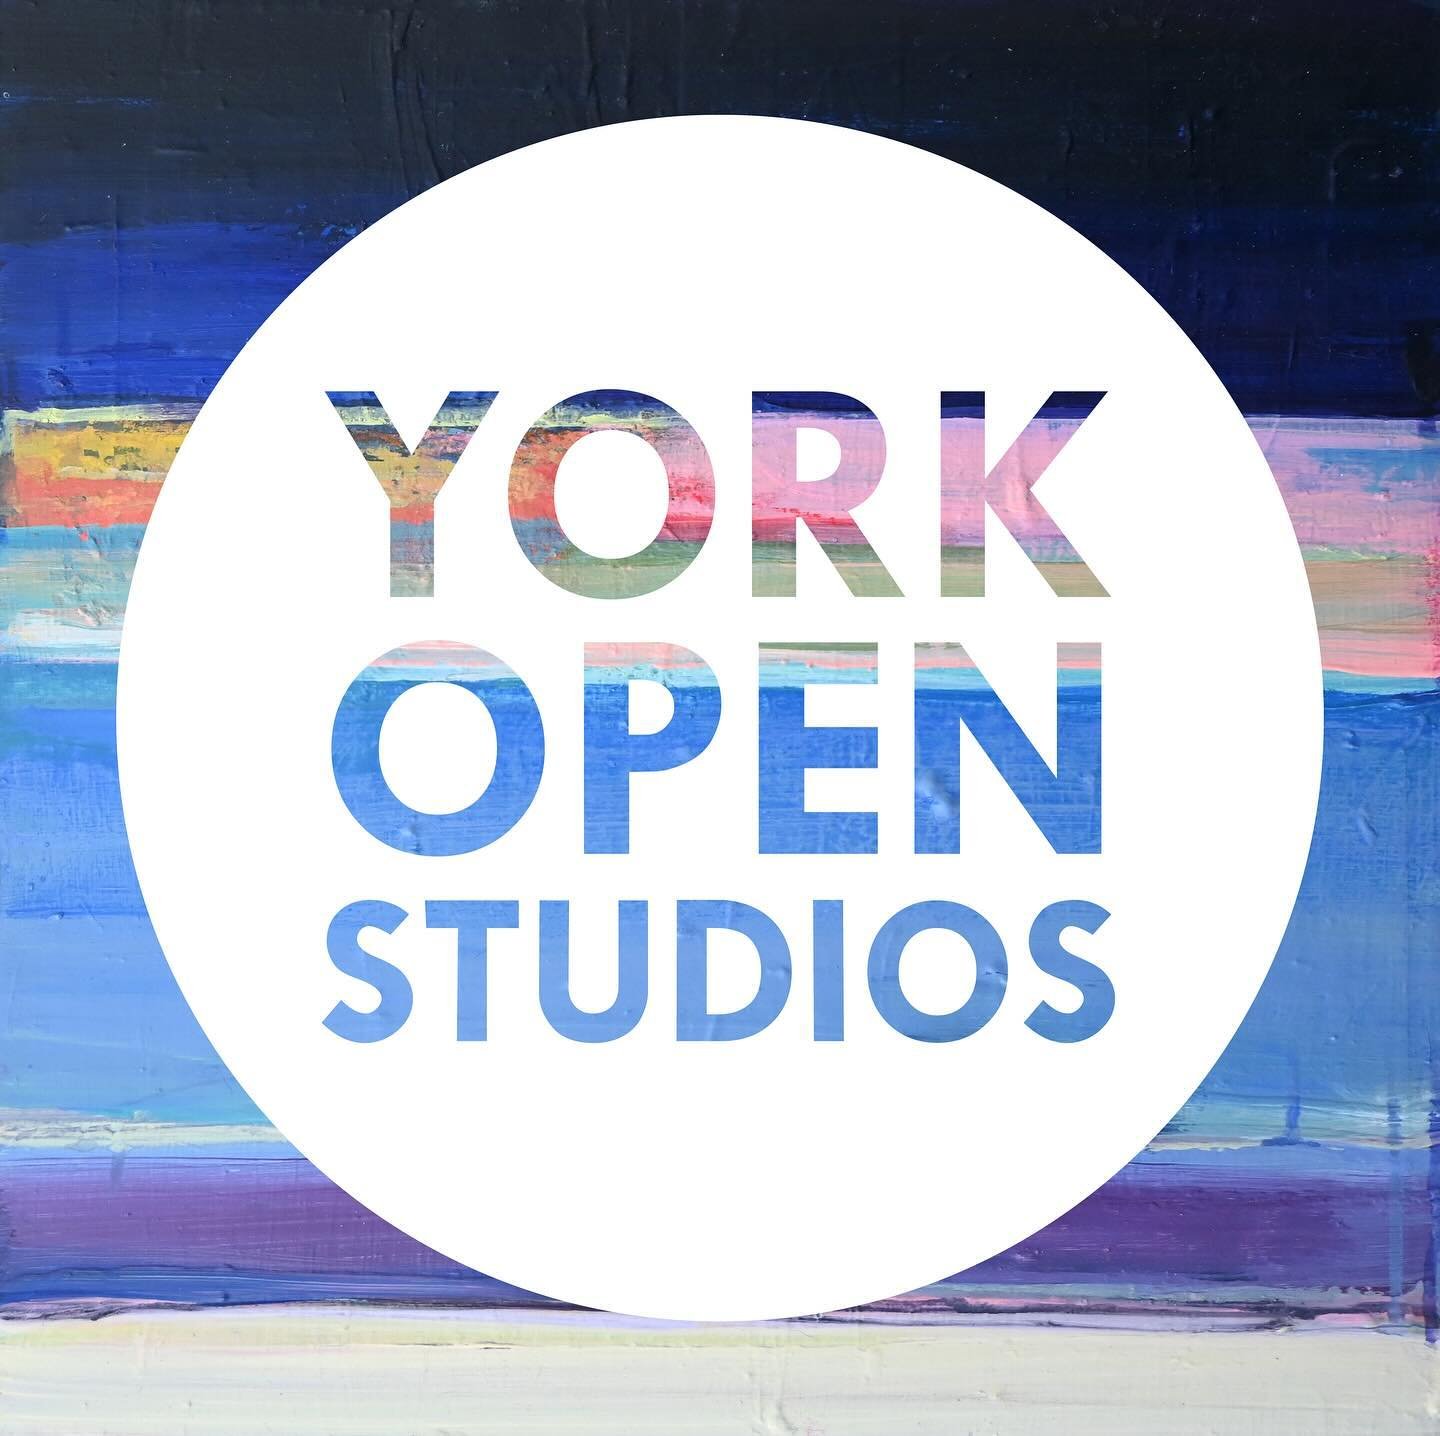 York Open Studios continues this weekend.
We are Venue 88.
Be great to see you. Saturday and Sunday 10am-5pm.

@yorkopenstudios